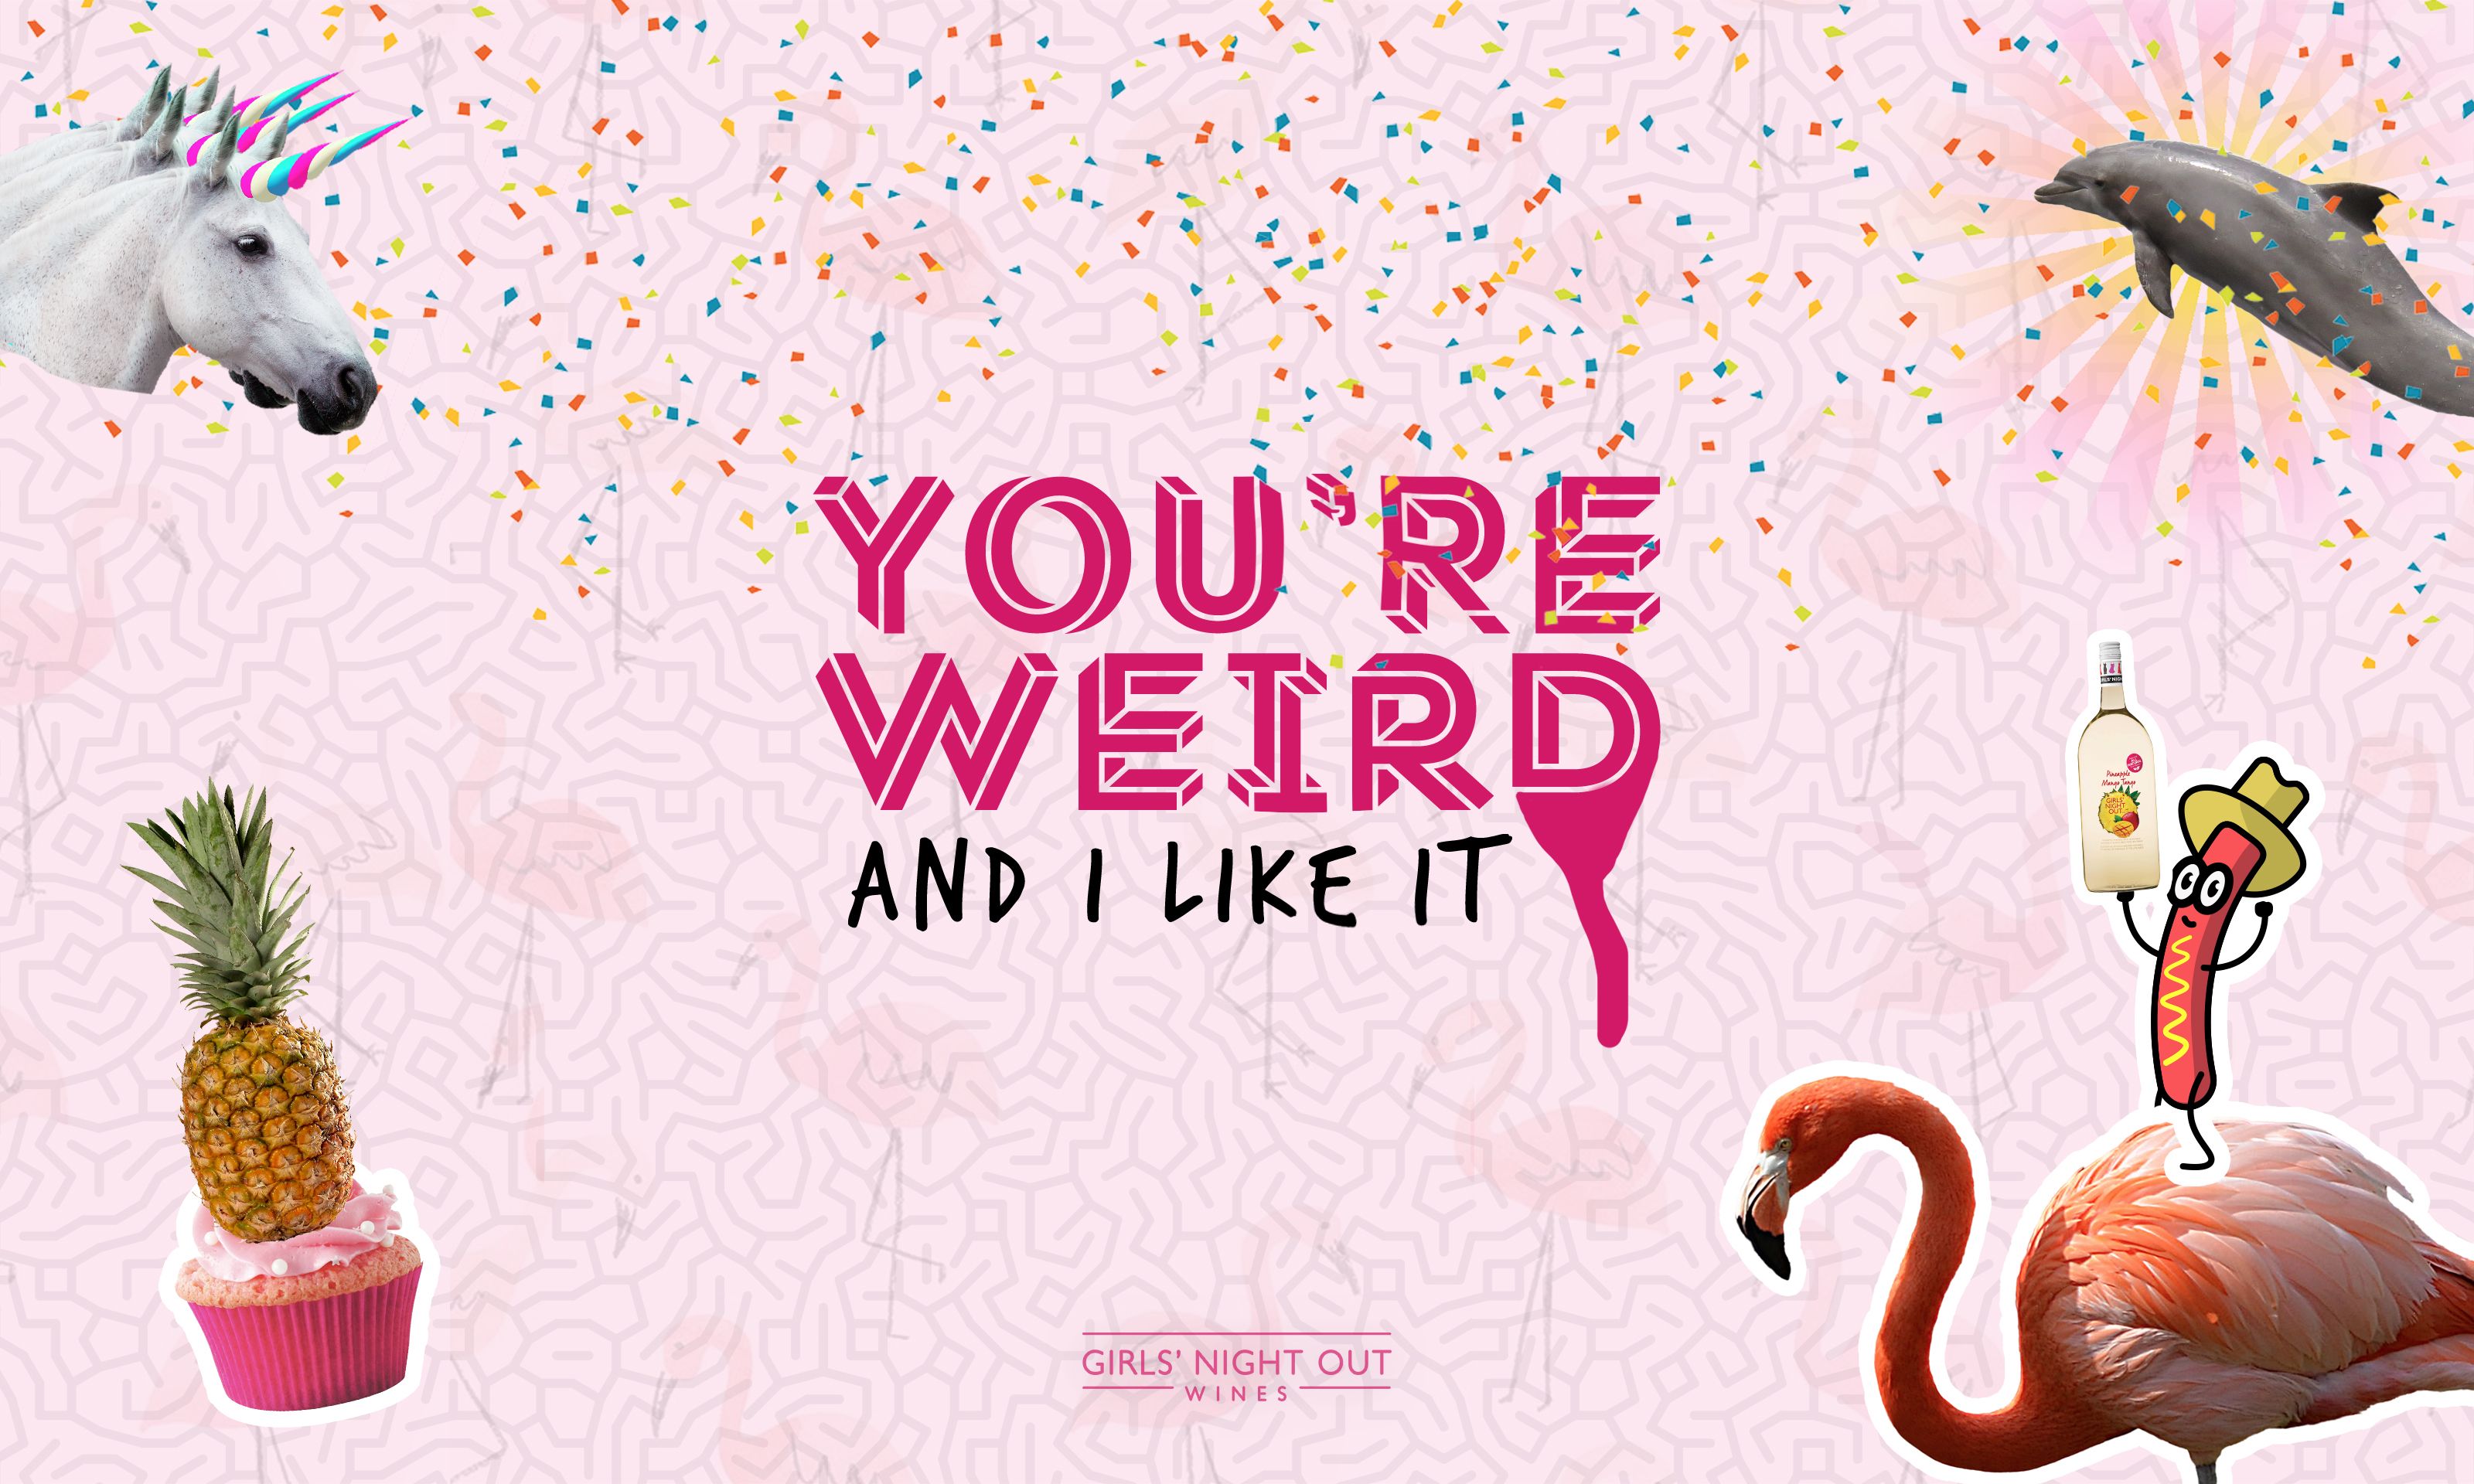 Get weird (and cute) with these wallpaper